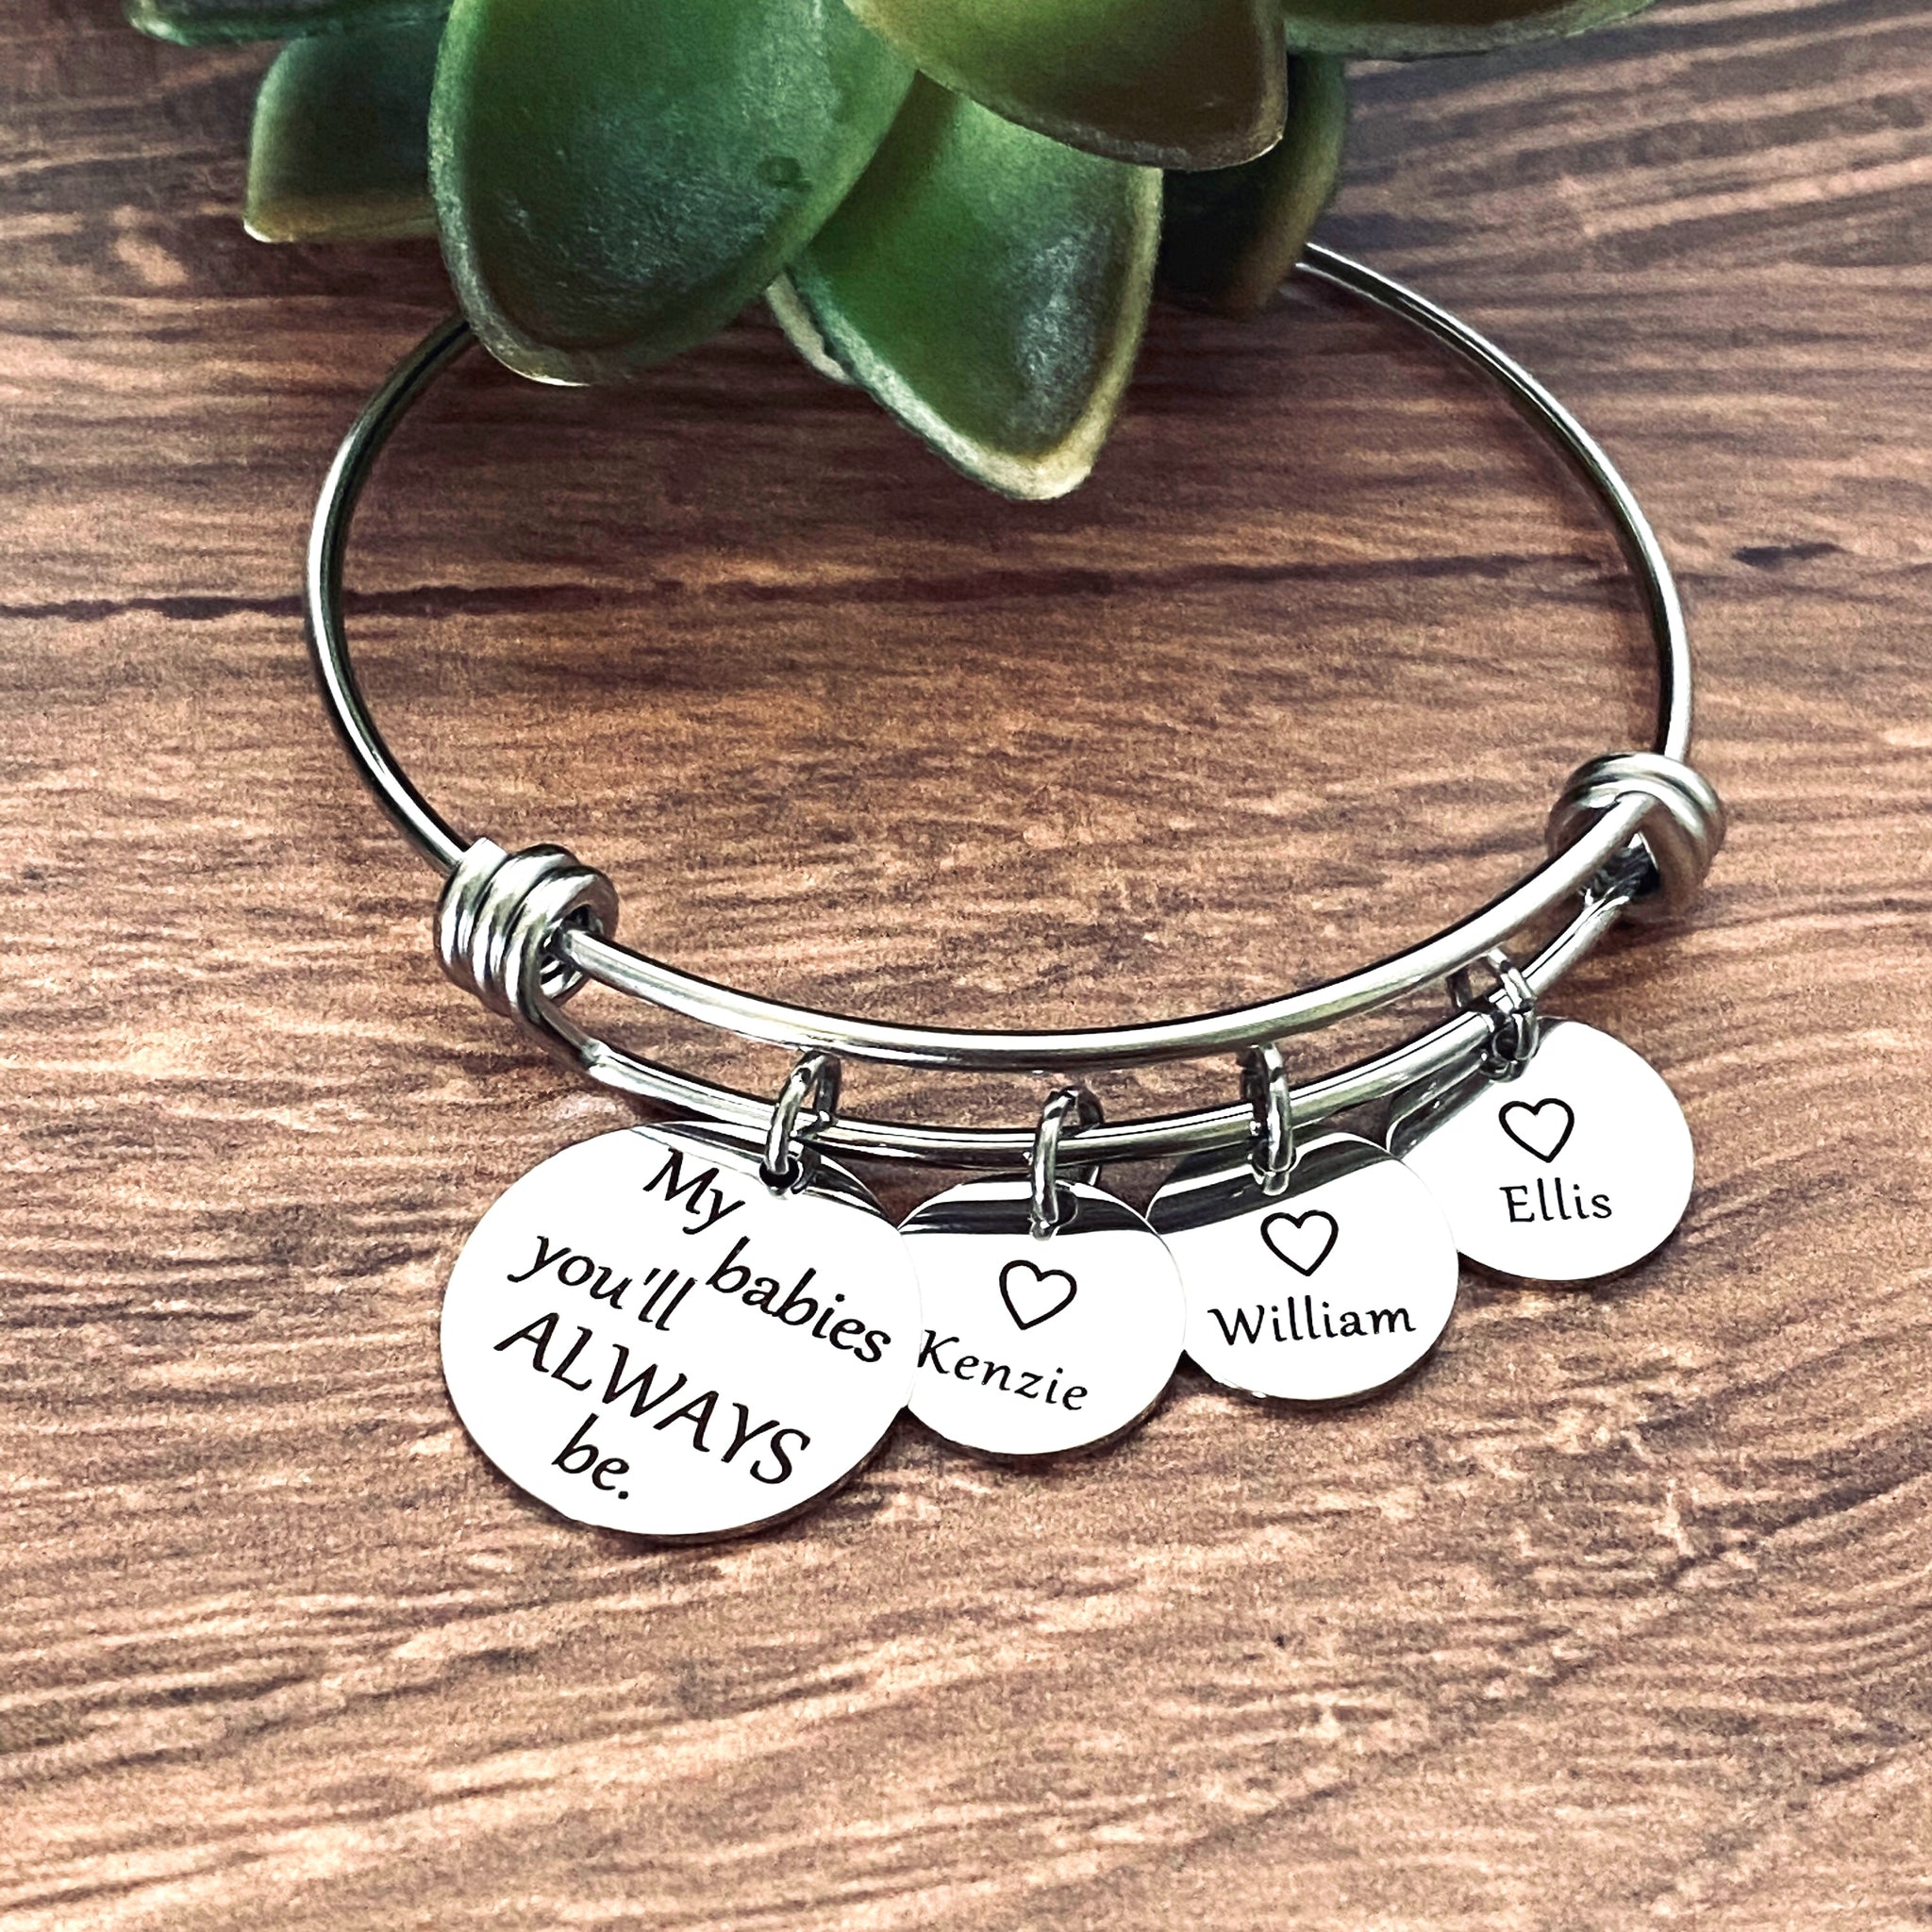  Personalized Initial Bracelet Engraved Letter Charm Bracelet  Paper Clip Chain Jewelry Custom Heart Pendant Best Friend Birthday Gift  -P-BR-MH : Handmade Products